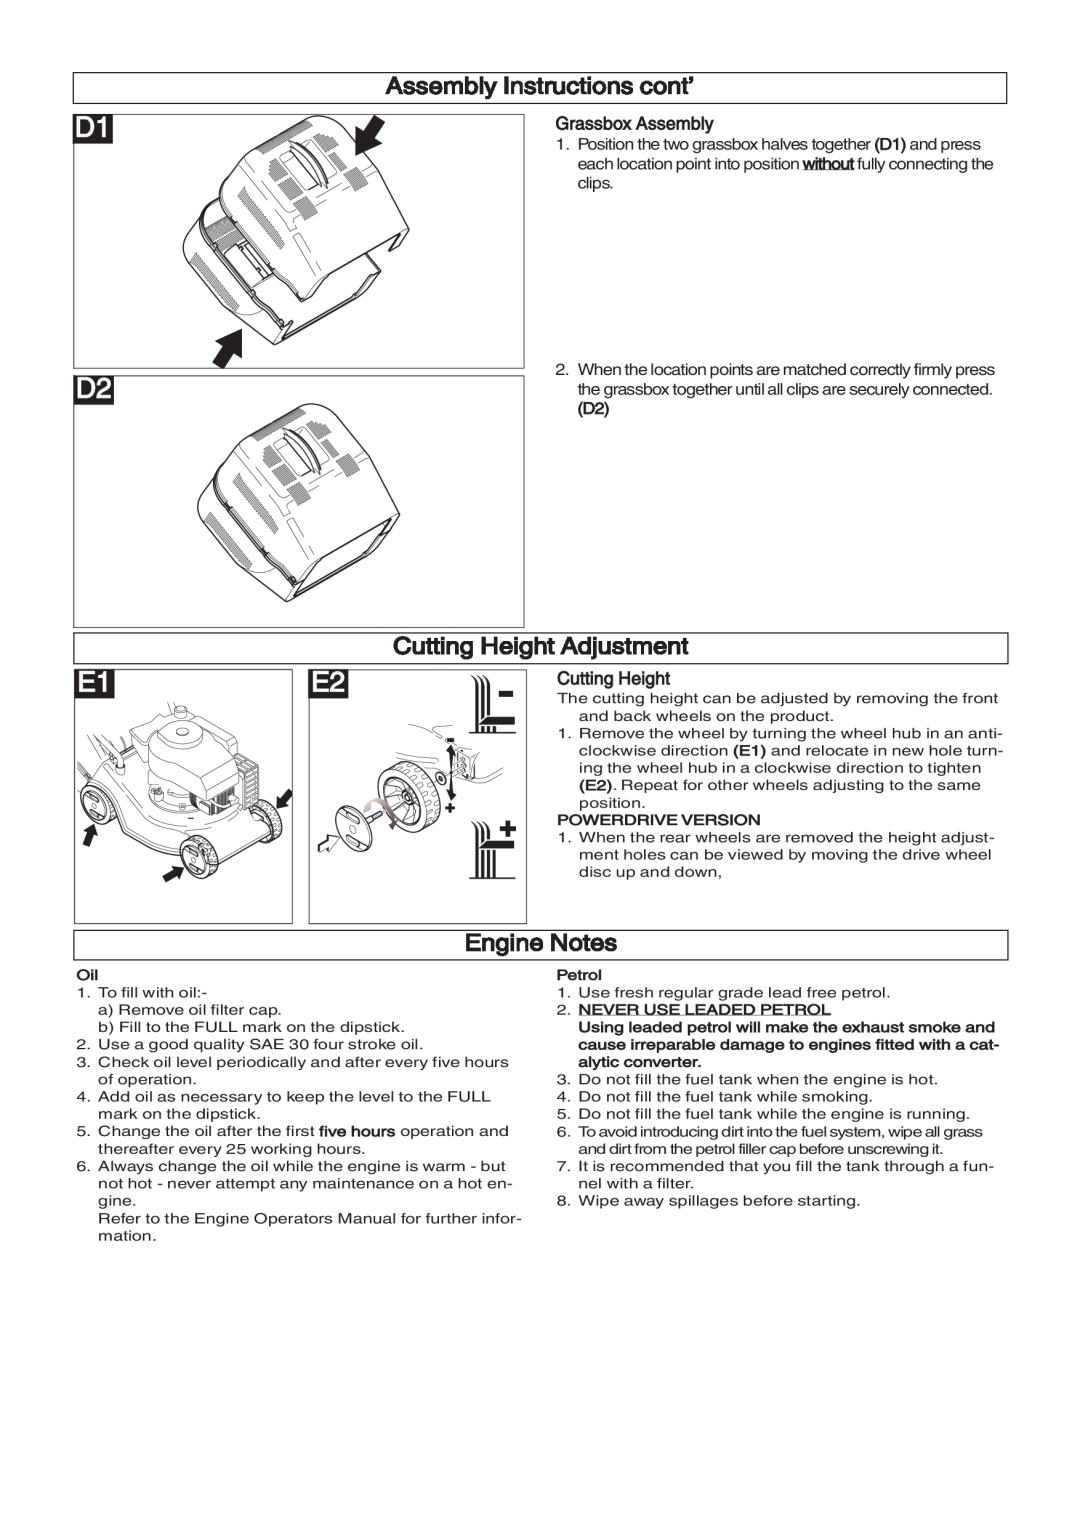 Husqvarna 965969401 manual Assembly Instructions cont’, Cutting Height Adjustment, Engine Notes, Grassbox Assembly, clips 